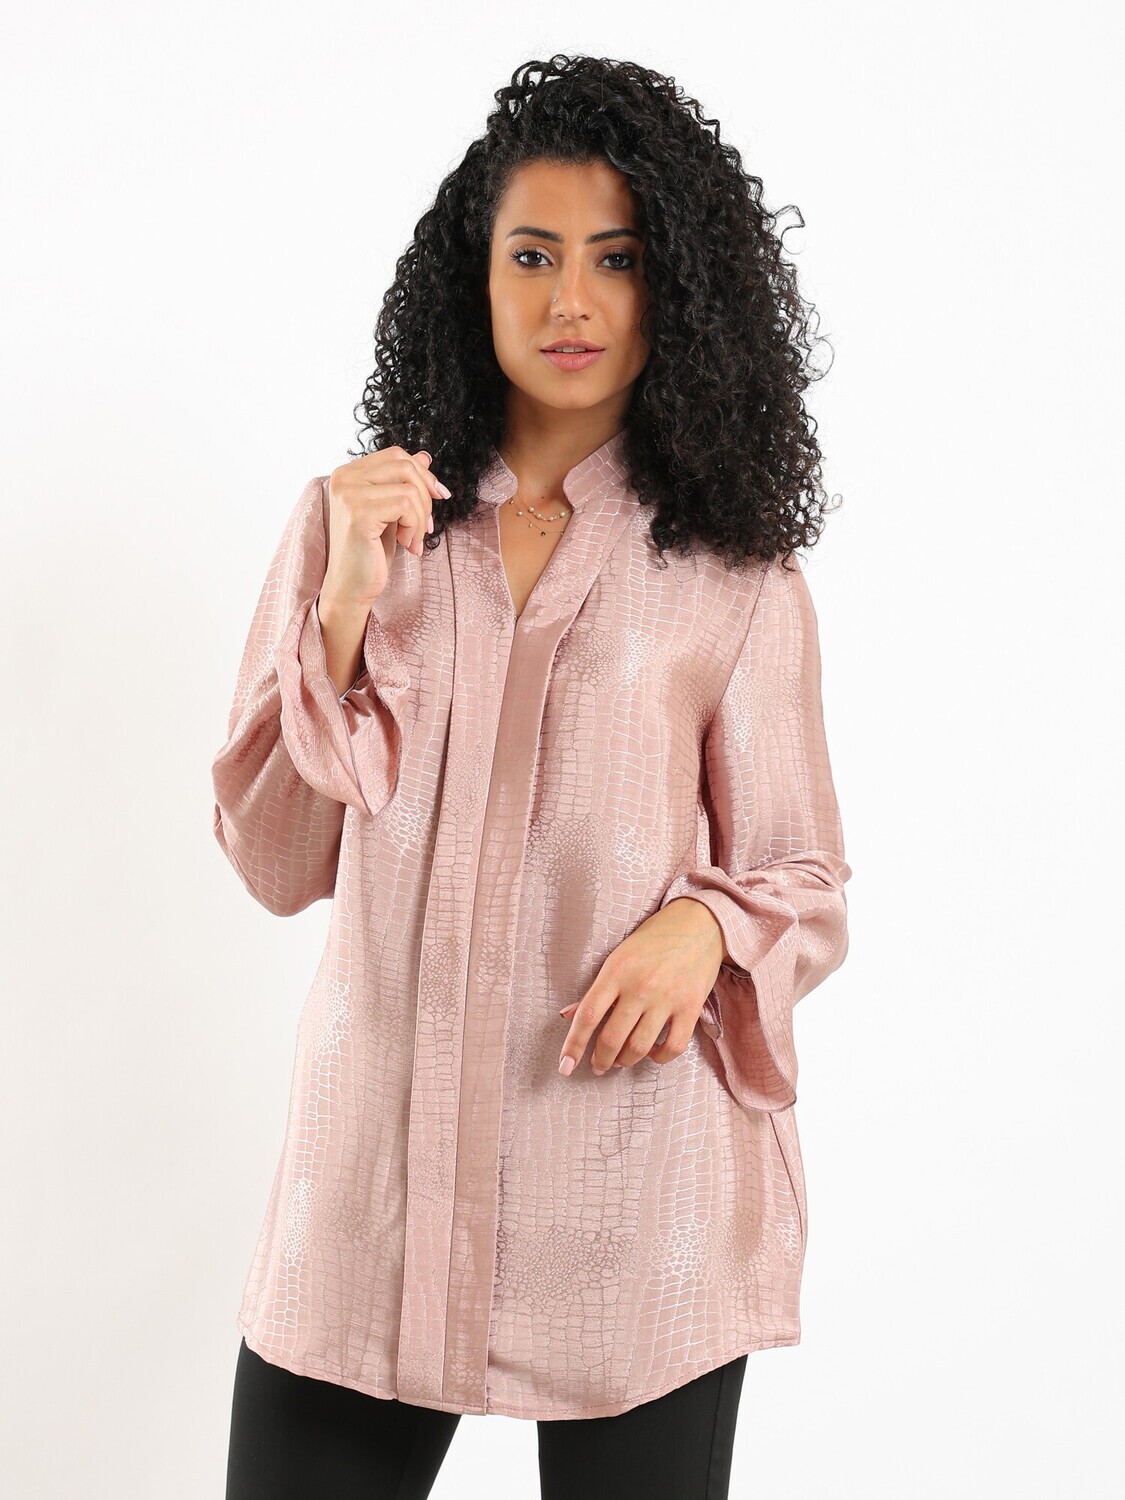 Self Patterned V Neck Long Sleeved Blouse With Poet Cuffs - Cashmir 2977